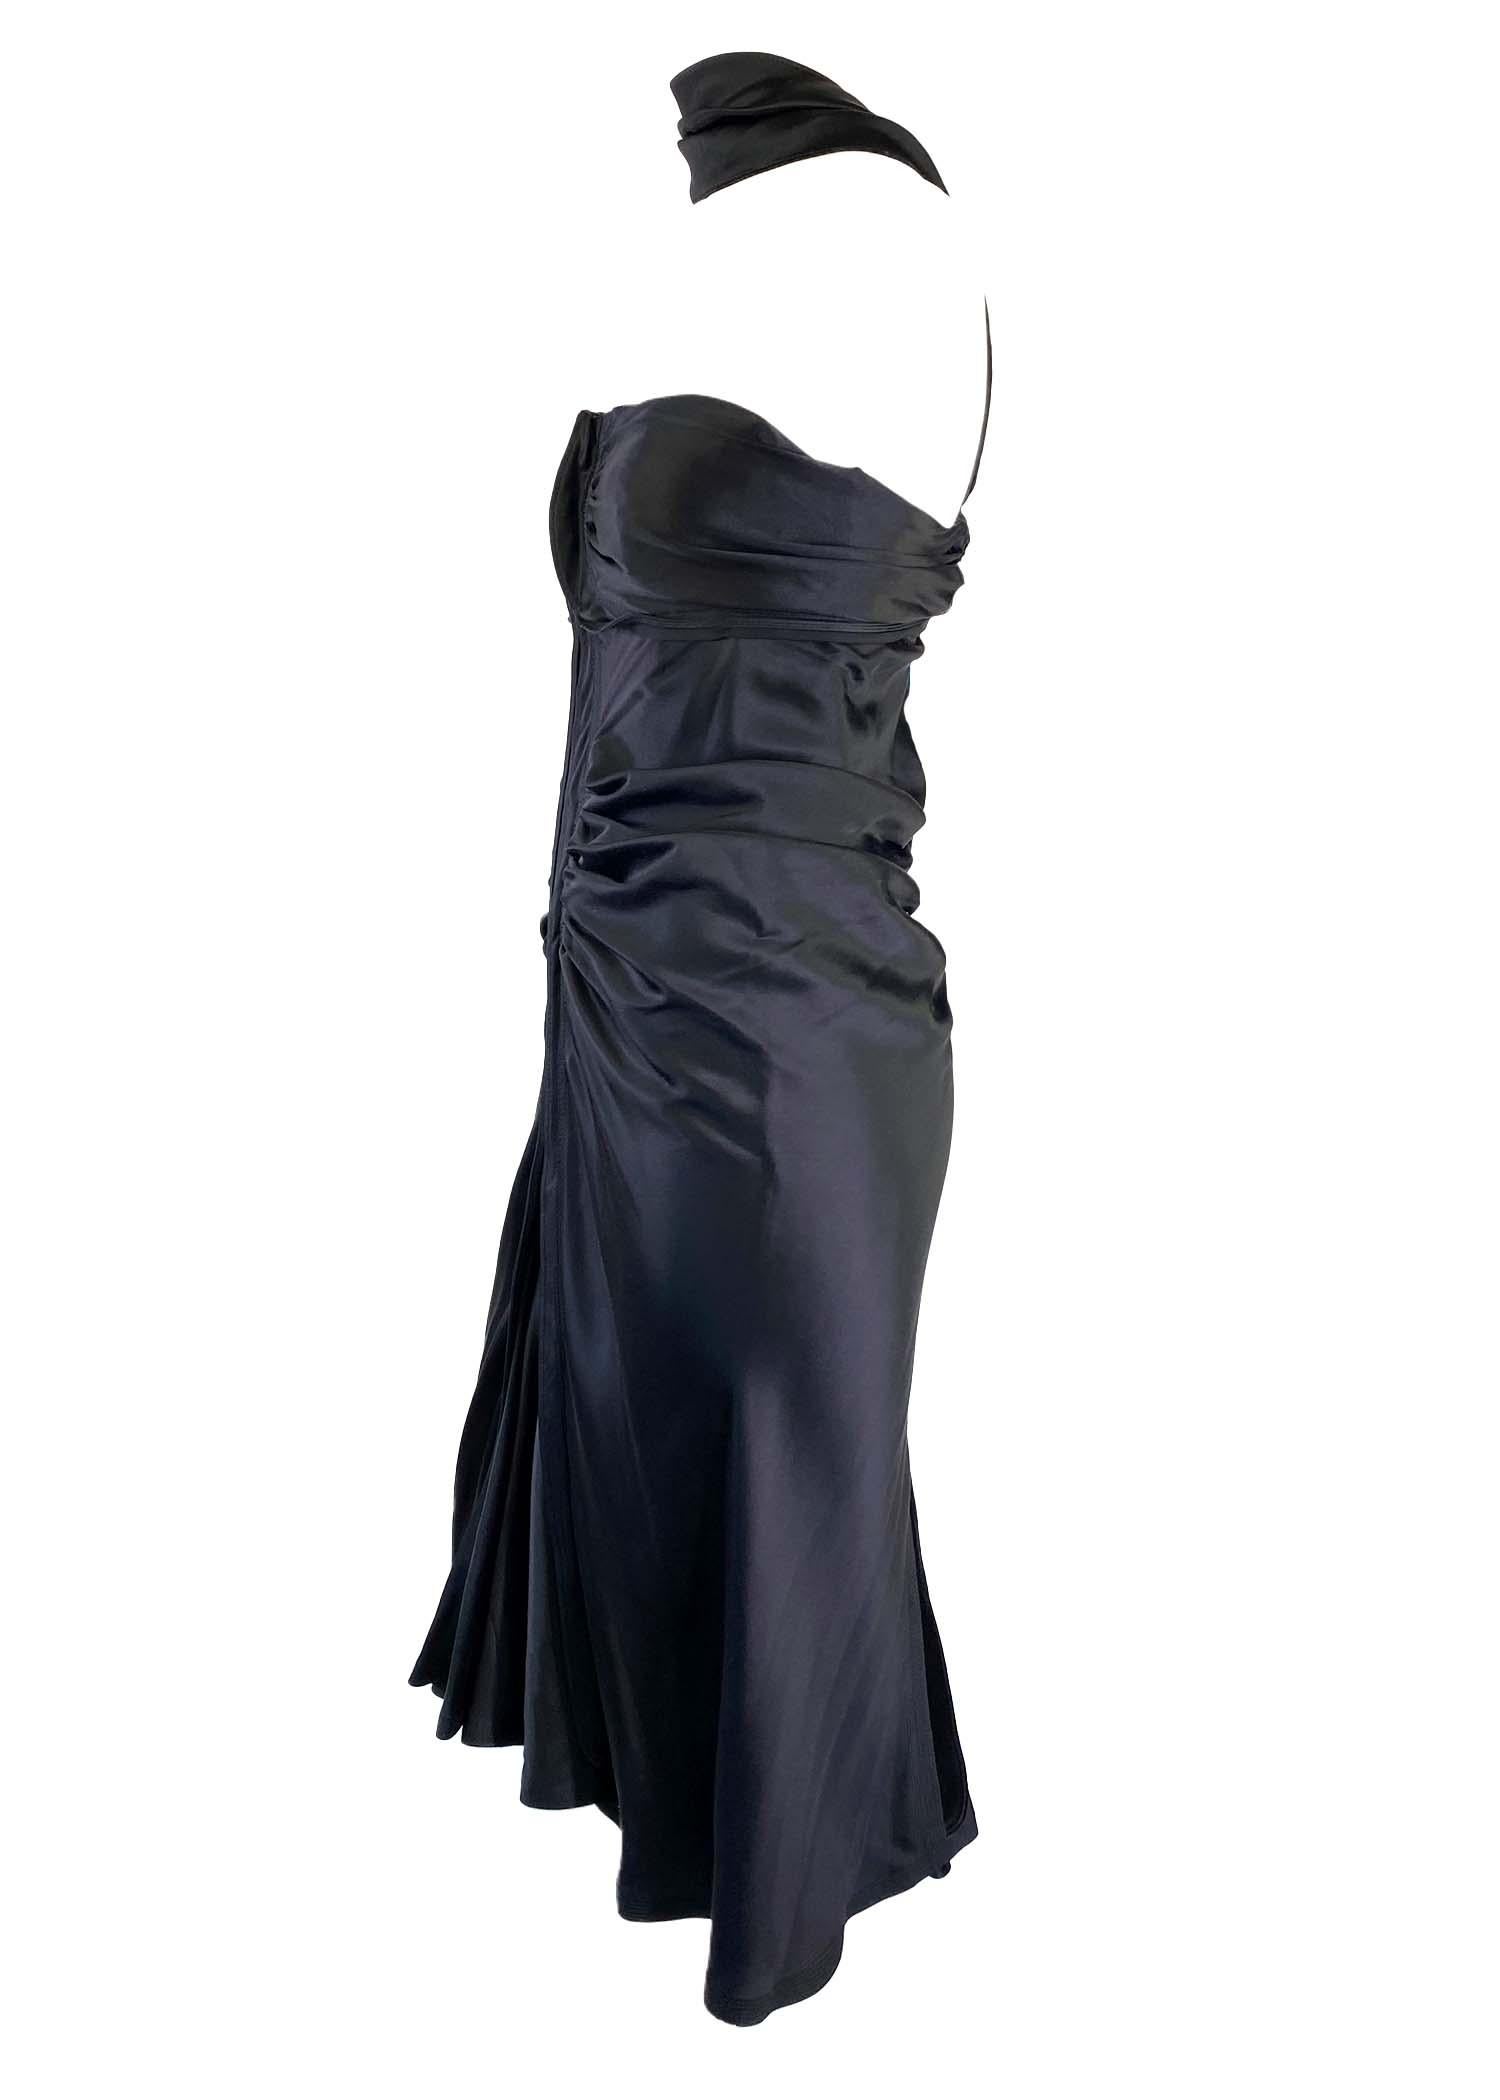 F/W 2003 Yves Saint Laurent by Tom Ford Black Silk Ruched Ruffle Cocktail Dress In Good Condition For Sale In West Hollywood, CA